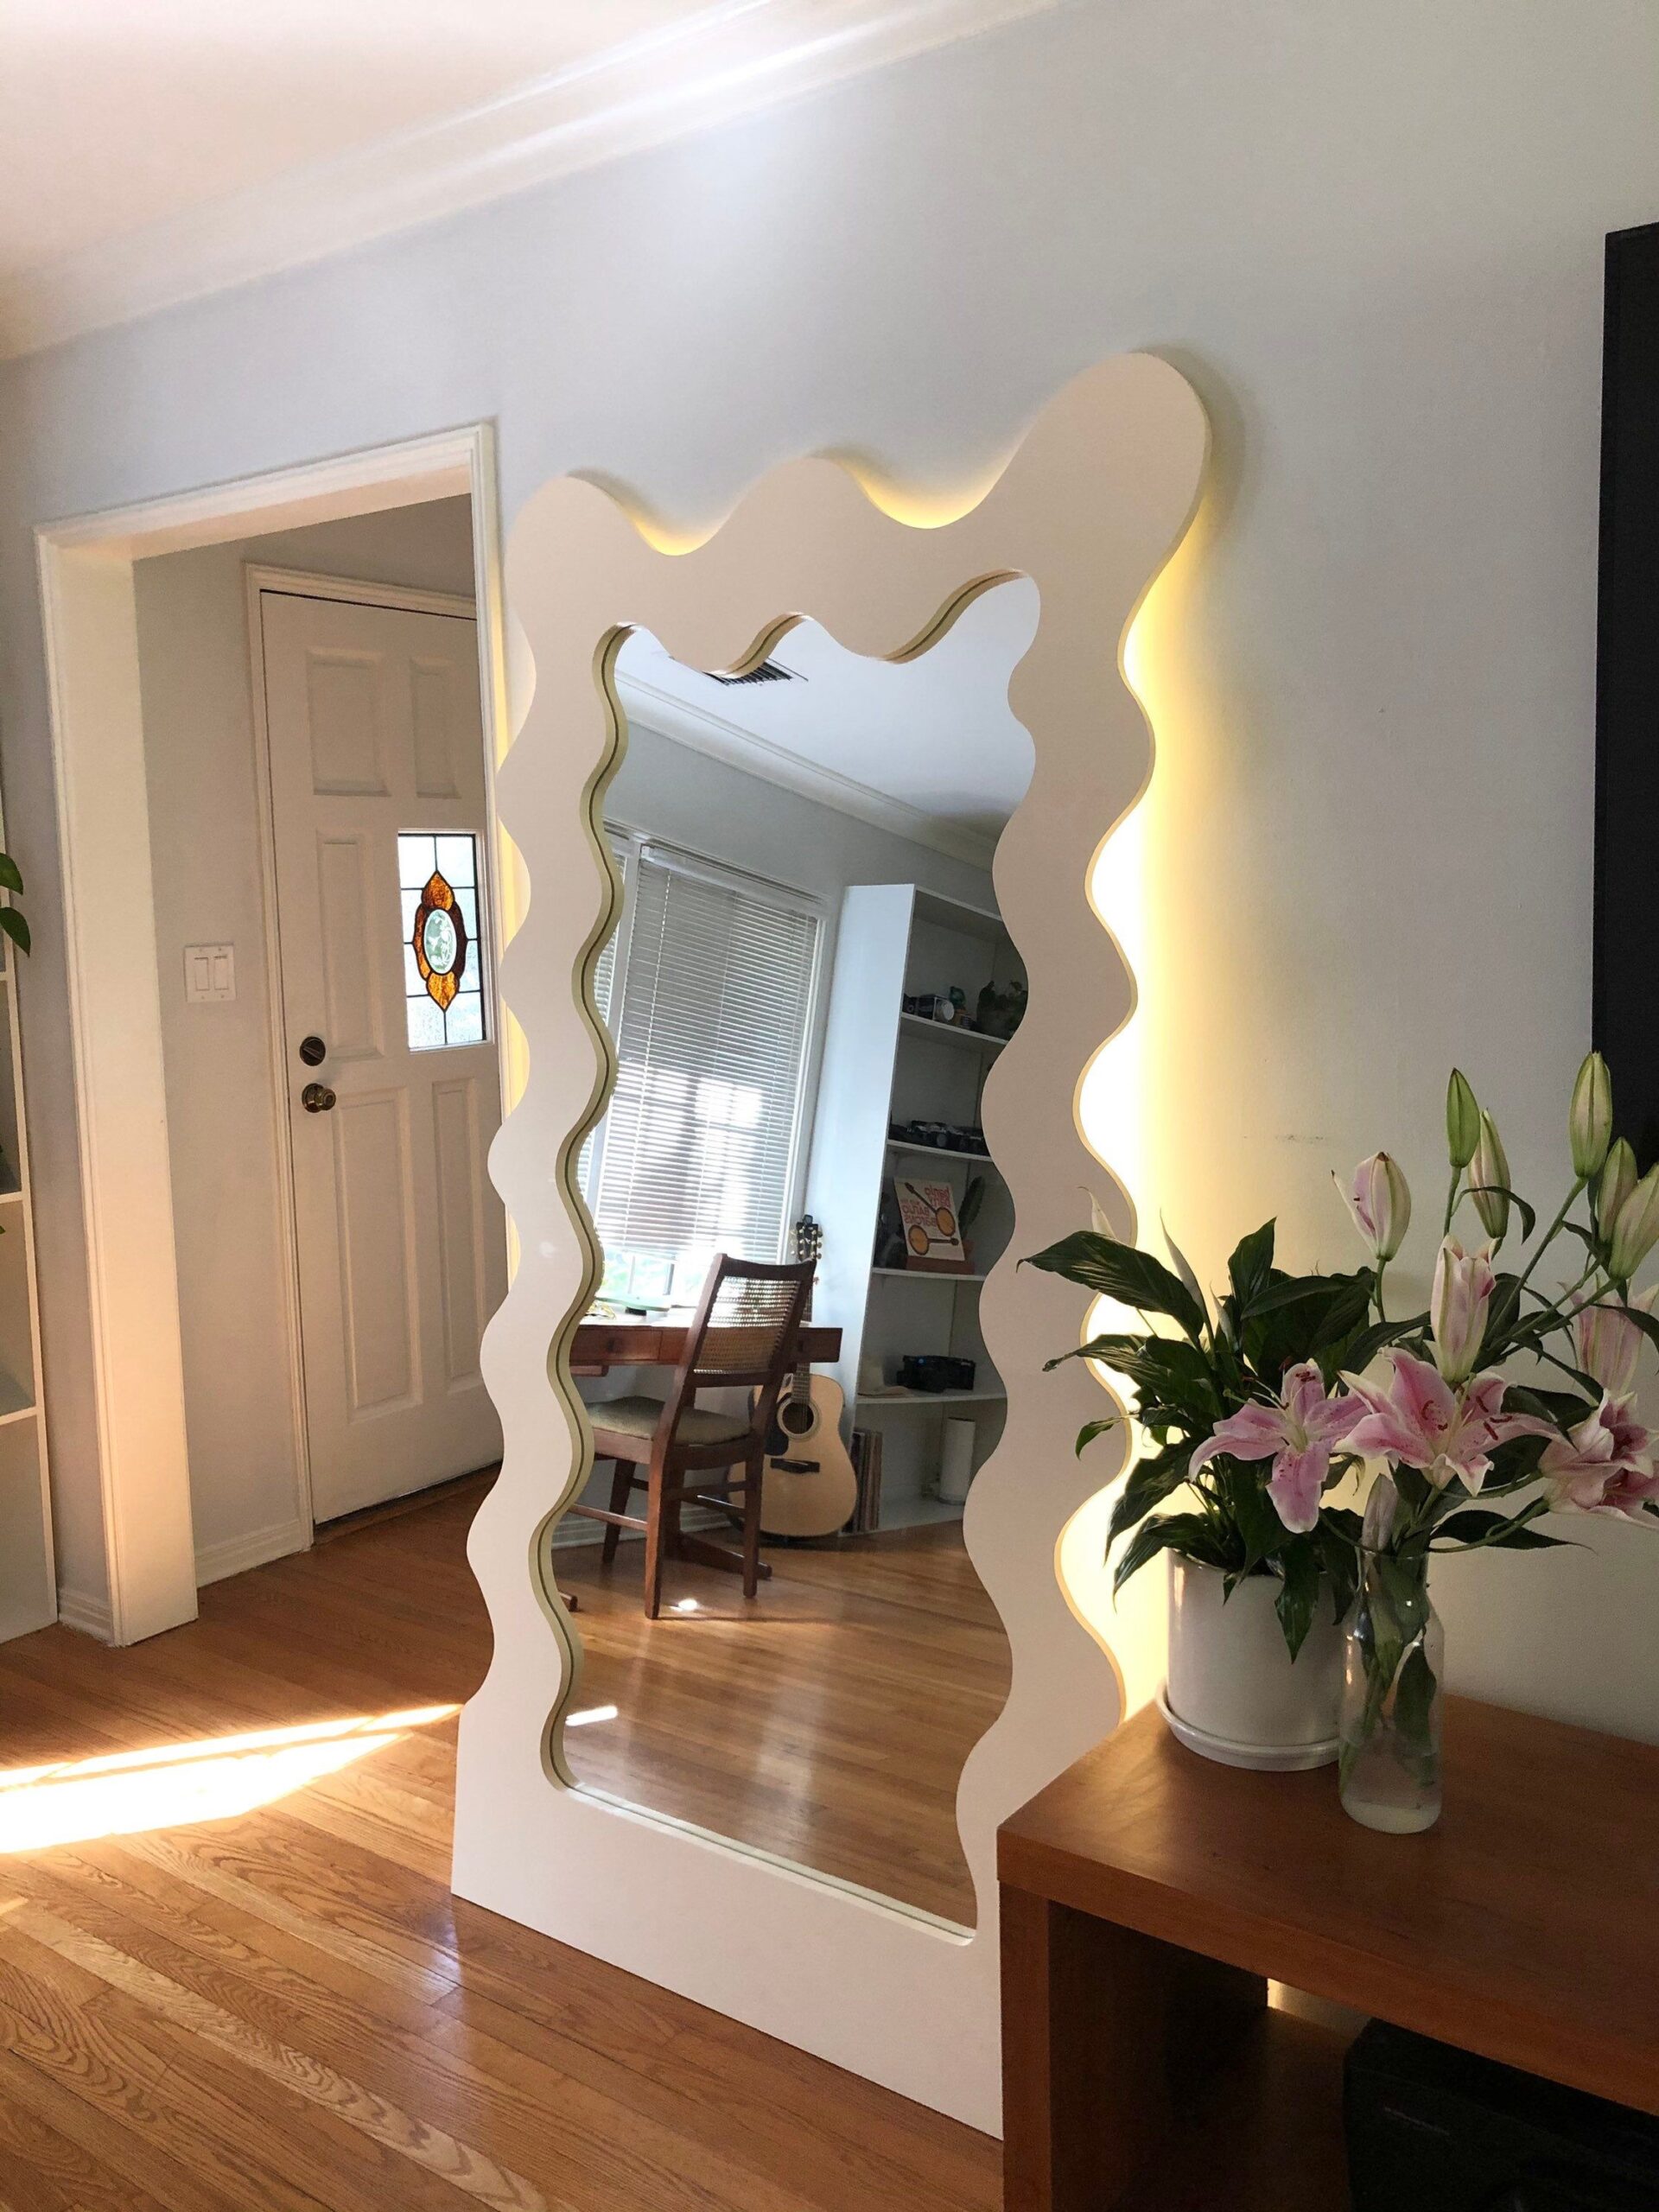 Illuminate Your Reflection: Mirror with Lights Designs for Every Room